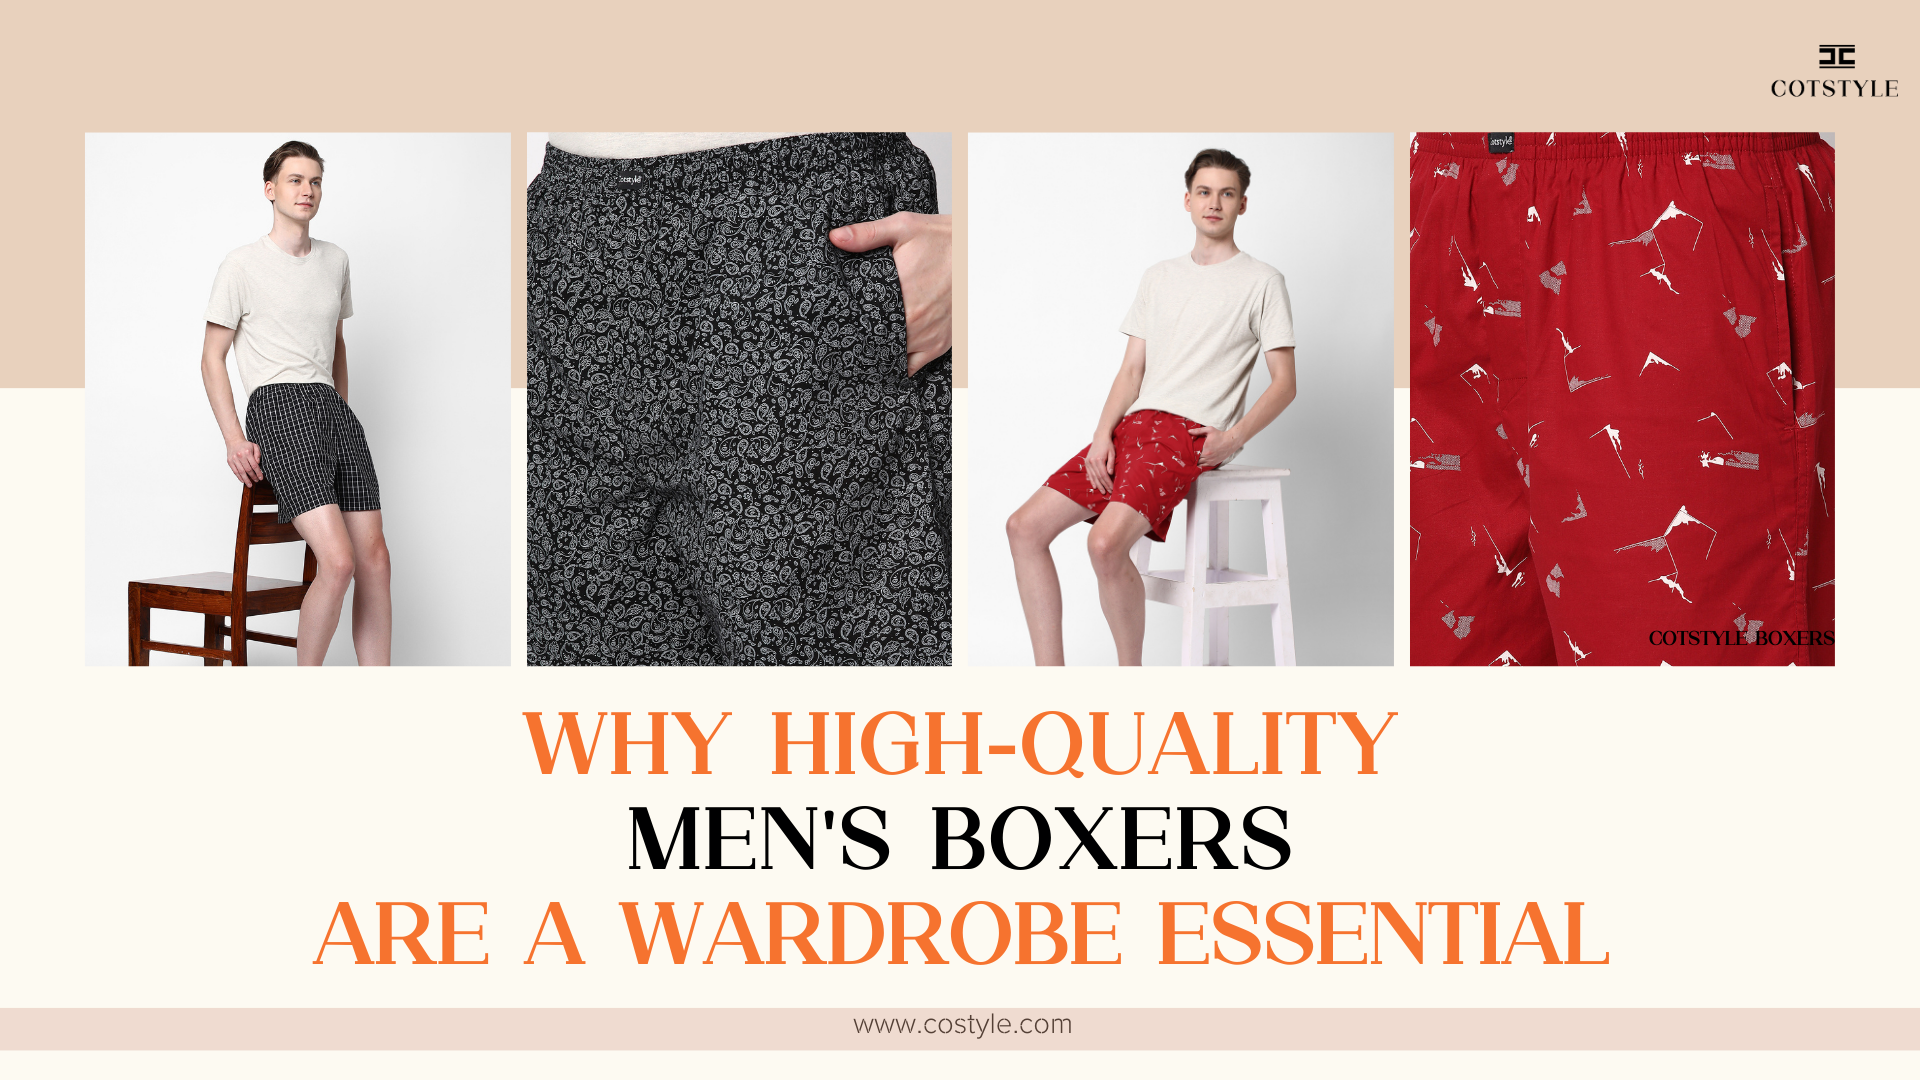 Why High-Quality Men's Boxers Are a Wardrobe Essential – Cotstyle